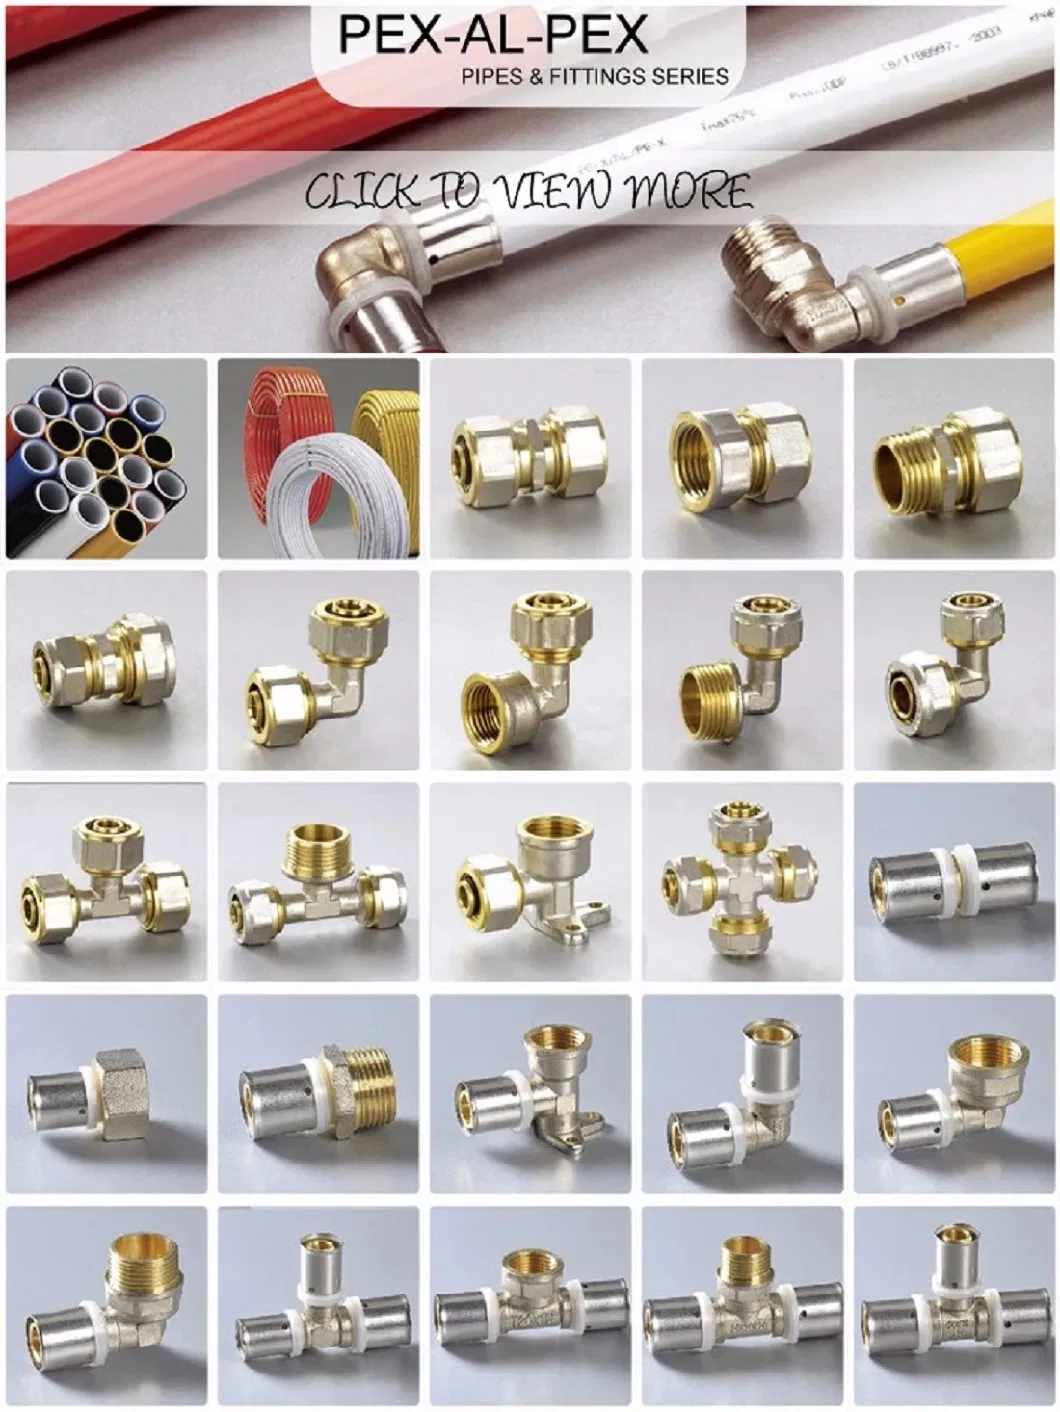 High Quality Brass Sleeve Compression Fitting Expertly Produced for Professional Installation